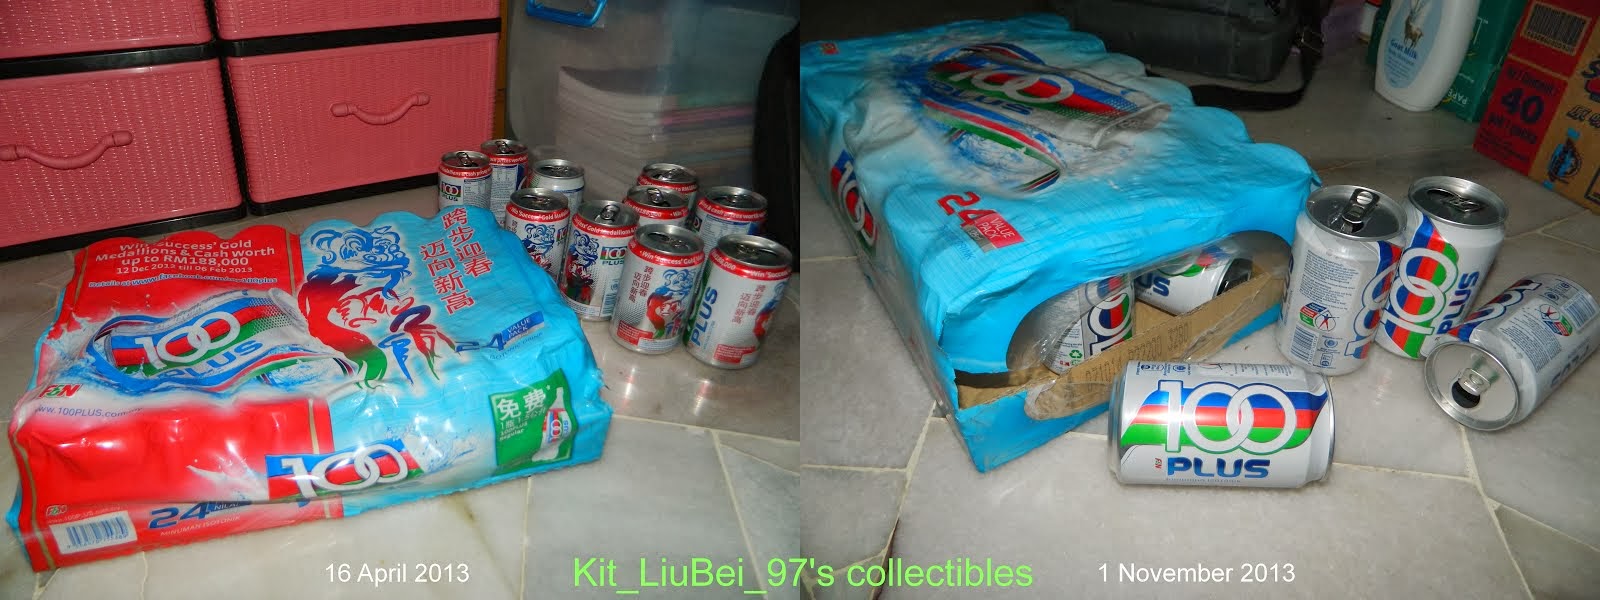 I like 100PLUS and collect various cans!!!